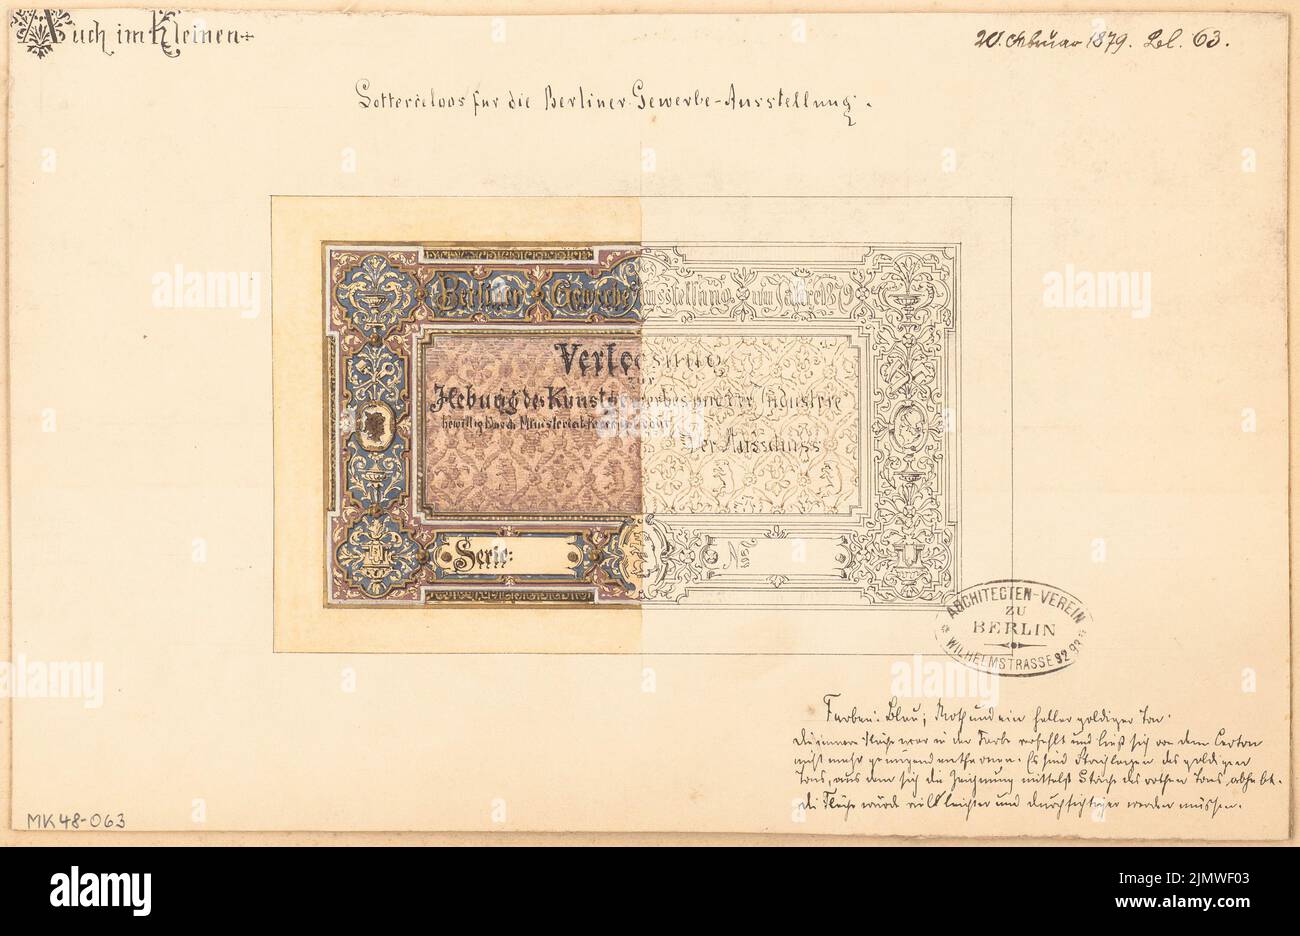 Unknown architect, going for the Berlin trade exhibition 1879. Monthly competition February 1879 (02.1879): View; Explanation text. Tusche watercolor on the box, 20.2 x 31.1 cm (including scan edges) N.N. : Los für die Berliner Gewerbeausstellung 1879. Monatskonkurrenz Februar 1879 Stock Photo